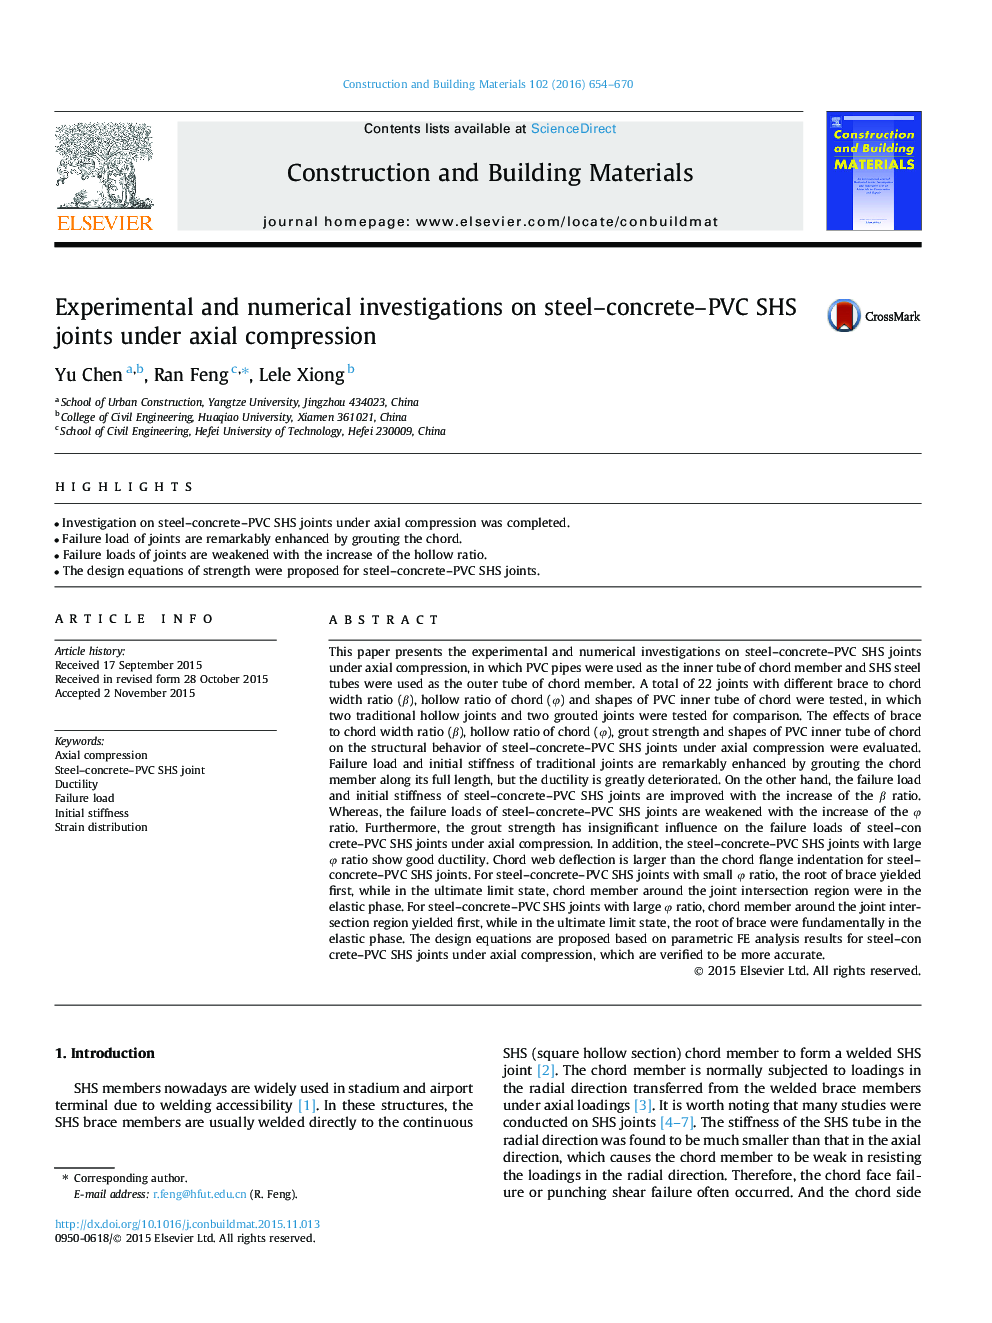 Experimental and numerical investigations on steel-concrete-PVC SHS joints under axial compression